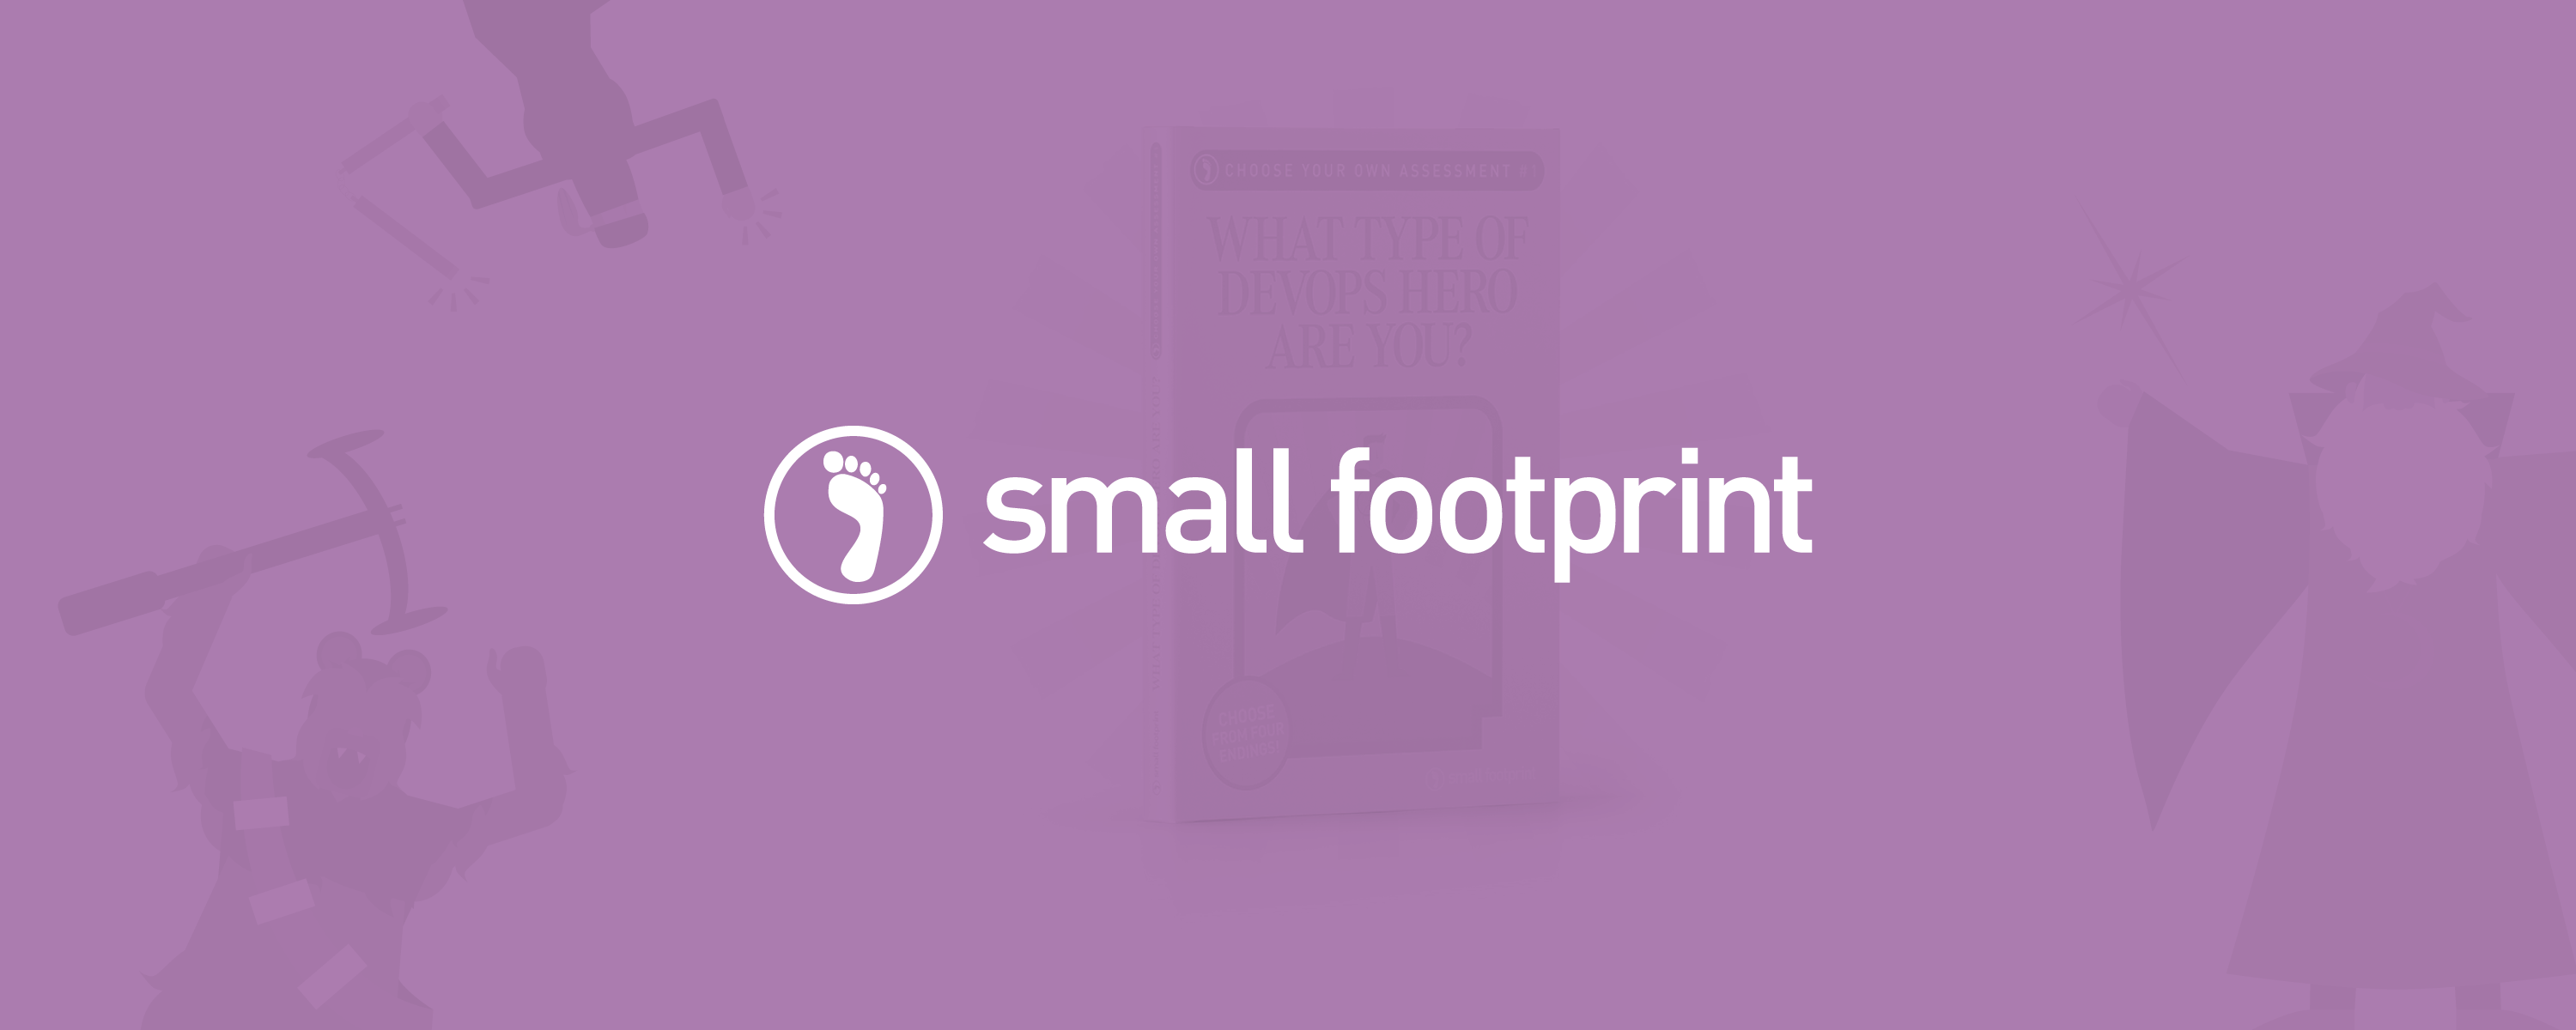 Featured image for “Small Footprint”